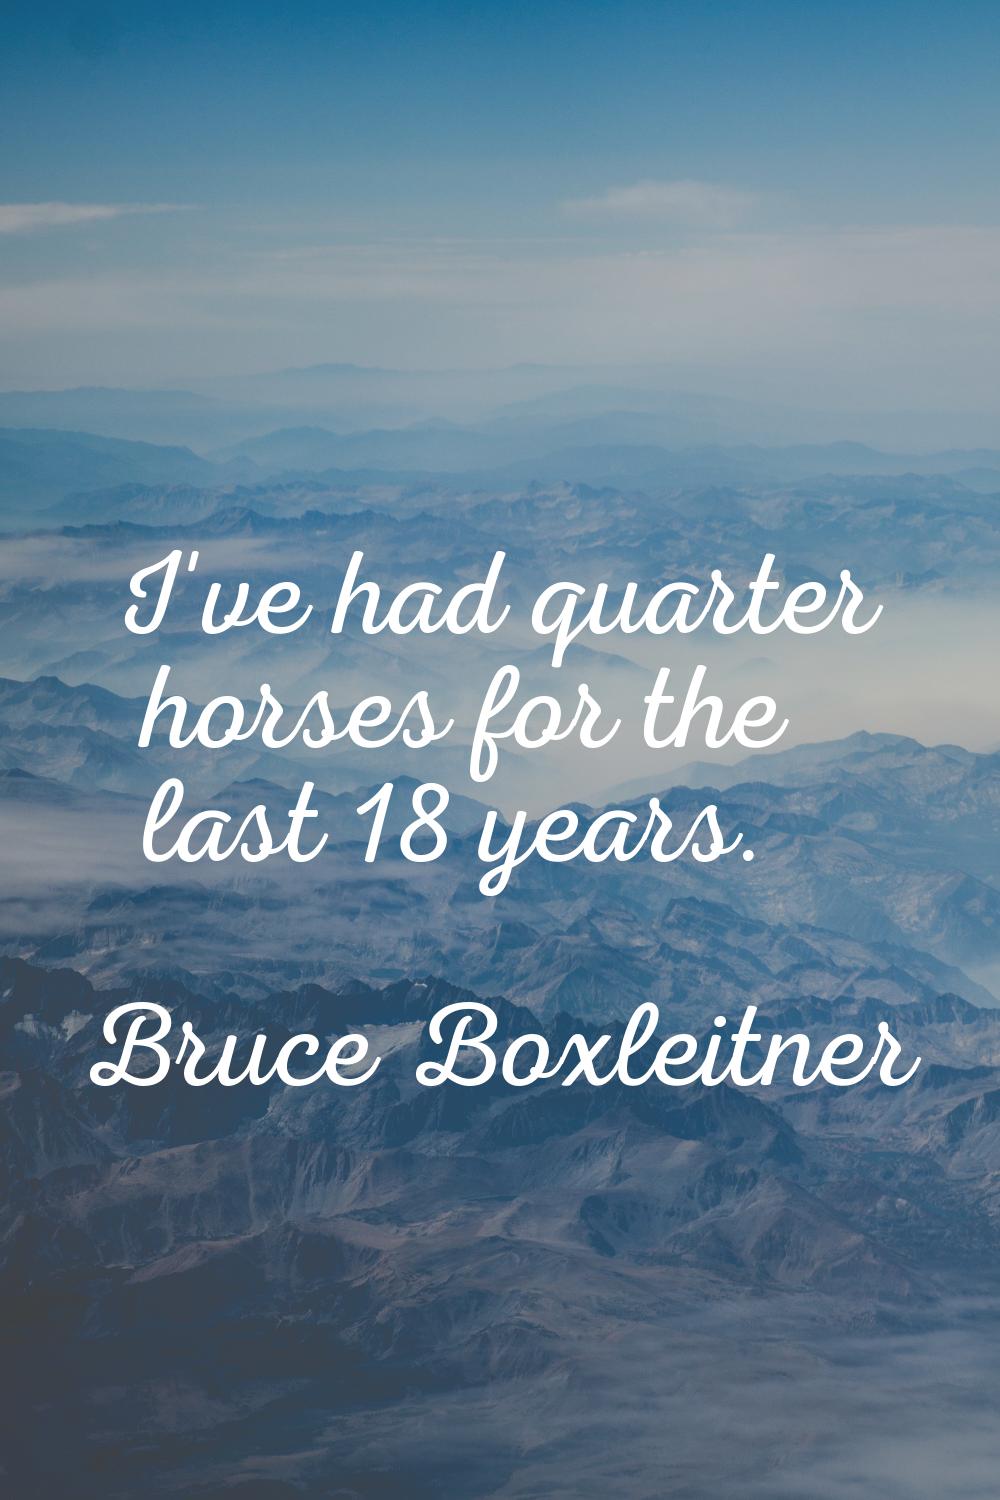 I've had quarter horses for the last 18 years.